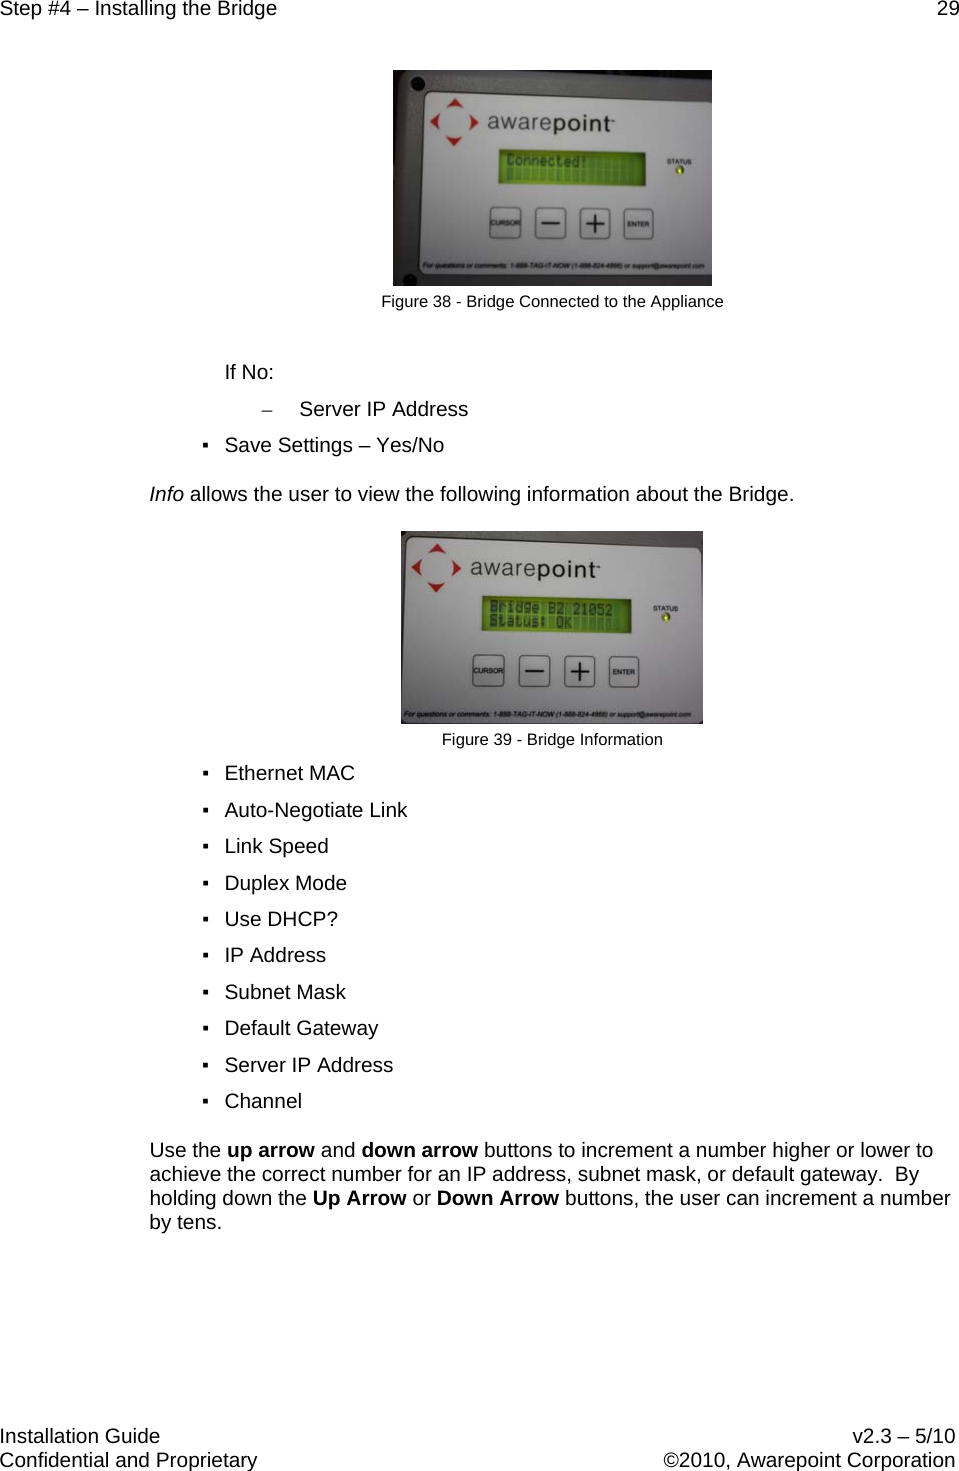 Step #4 – Installing the Bridge    29   Installation Guide    v2.3 – 5/10 Confidential and Proprietary    ©2010, Awarepoint Corporation   Figure 38 - Bridge Connected to the Appliance  If No: – Server IP Address ▪ Save Settings – Yes/No Info allows the user to view the following information about the Bridge.  Figure 39 - Bridge Information ▪ Ethernet MAC ▪ Auto-Negotiate Link ▪ Link Speed ▪ Duplex Mode ▪ Use DHCP? ▪ IP Address ▪ Subnet Mask ▪ Default Gateway ▪ Server IP Address ▪ Channel Use the up arrow and down arrow buttons to increment a number higher or lower to achieve the correct number for an IP address, subnet mask, or default gateway.  By holding down the Up Arrow or Down Arrow buttons, the user can increment a number by tens.  